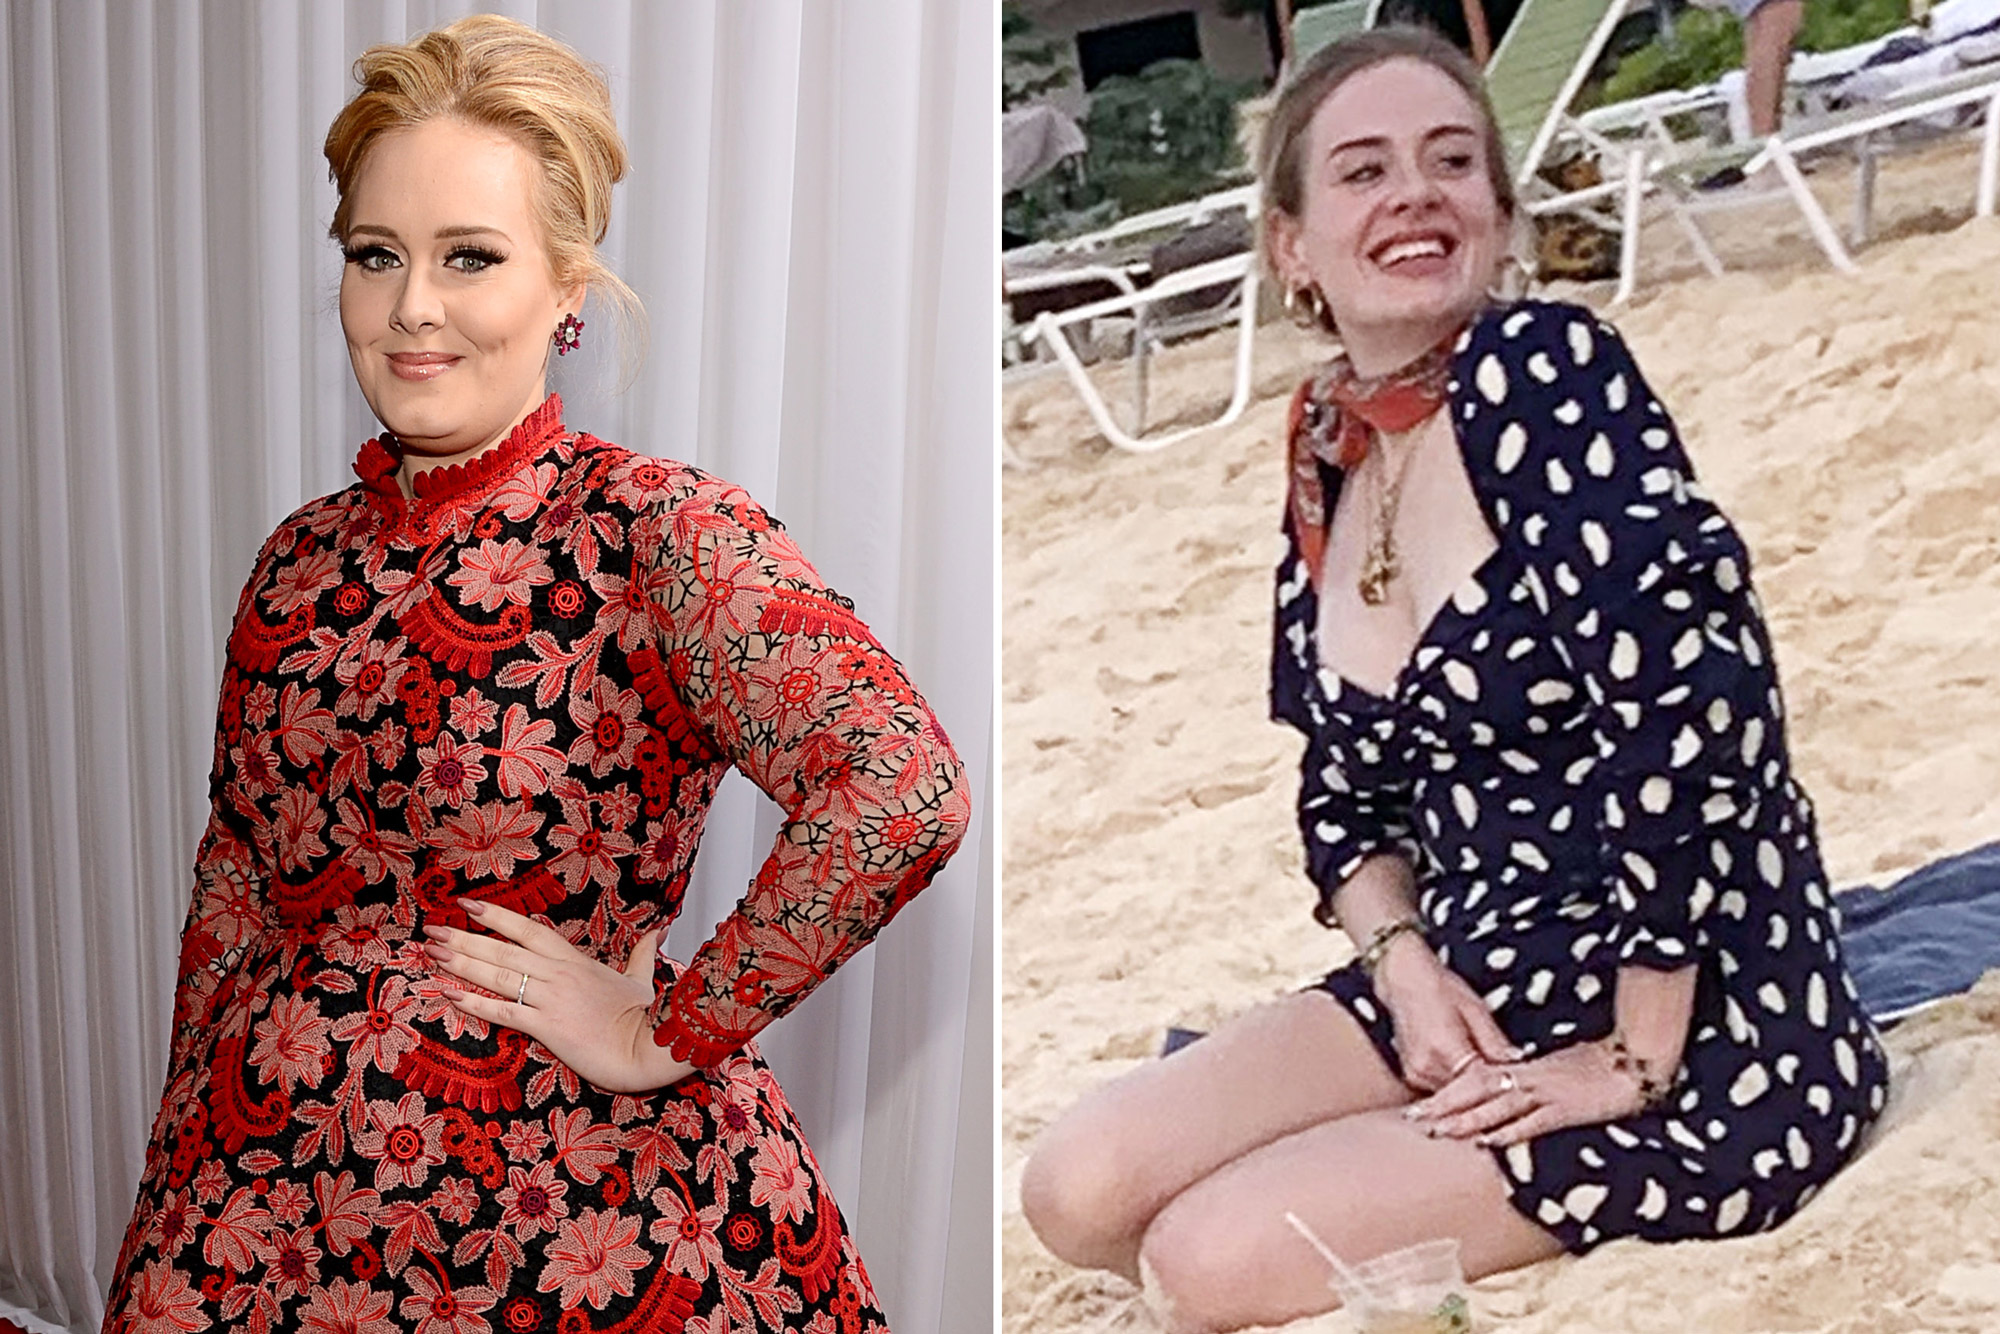 The sirtfood diet: What to know about Adele's weight-loss secret